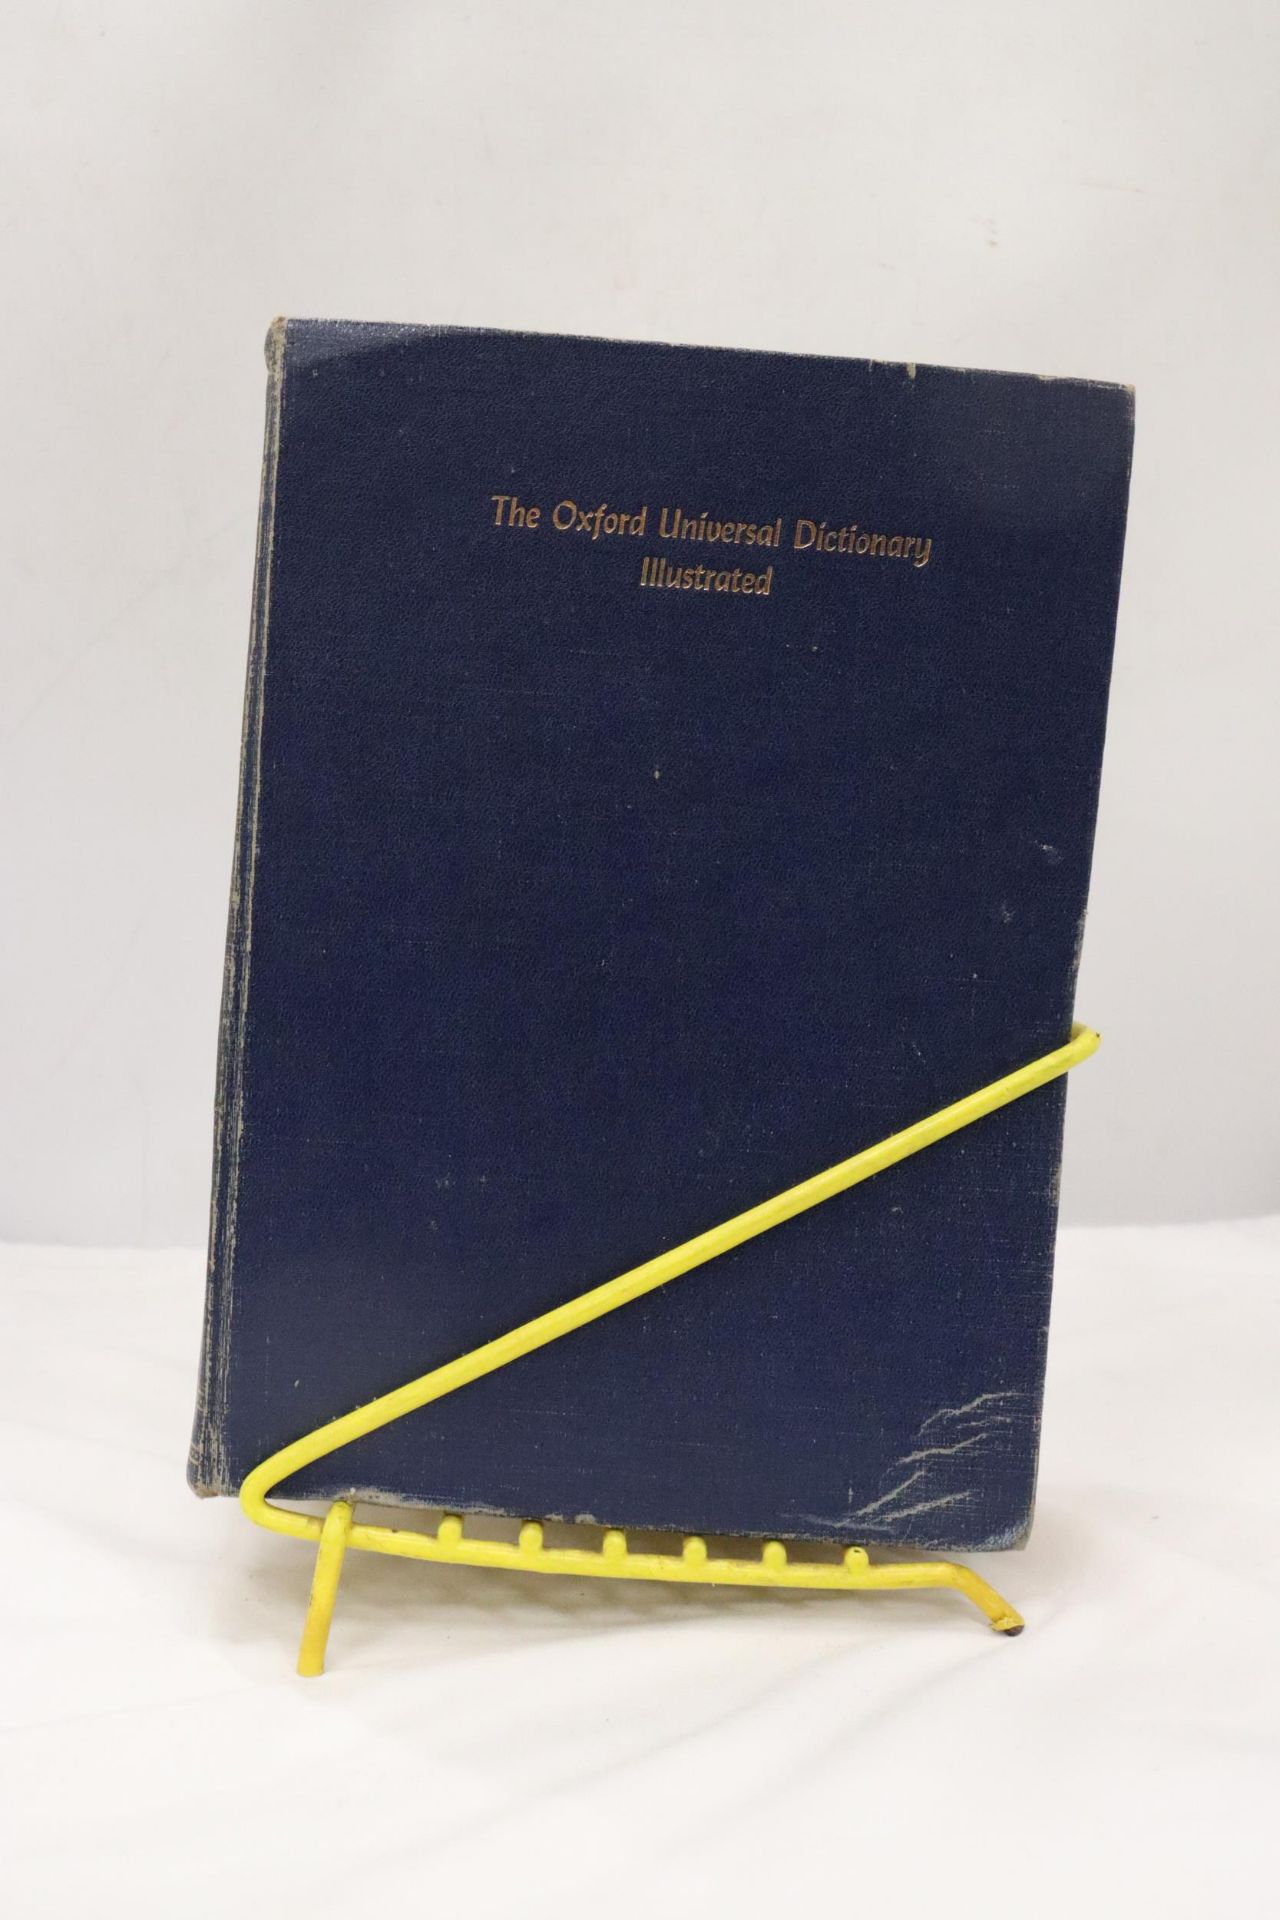 A PAIR OF OXFORD UNIVERSAL DICTIONARY'S IN METAL STAND - Image 4 of 5